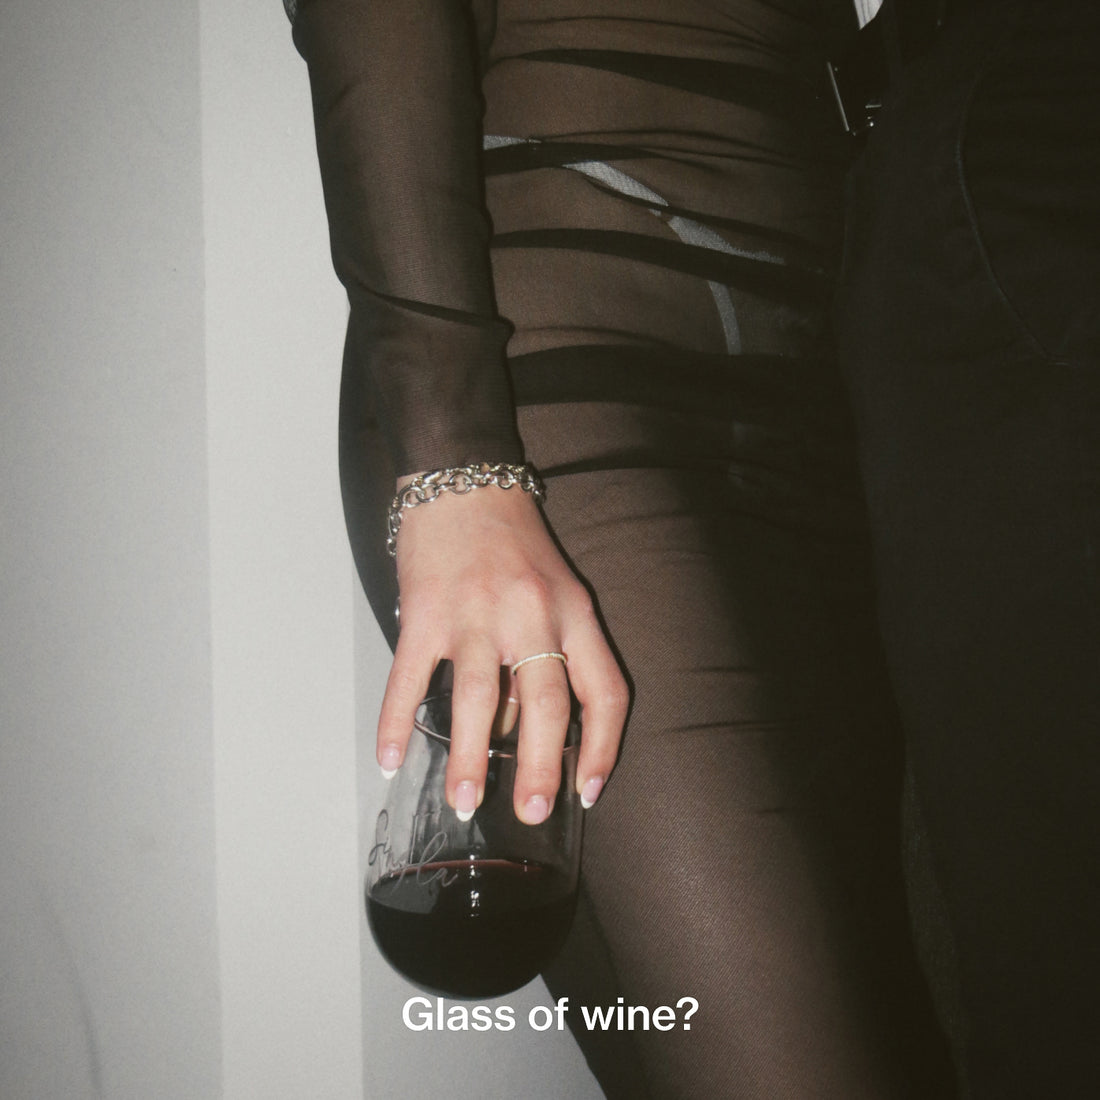 Girl in sheer dress and white underwear holding a glass of red wine with french nails and a silver tiffany bracelet